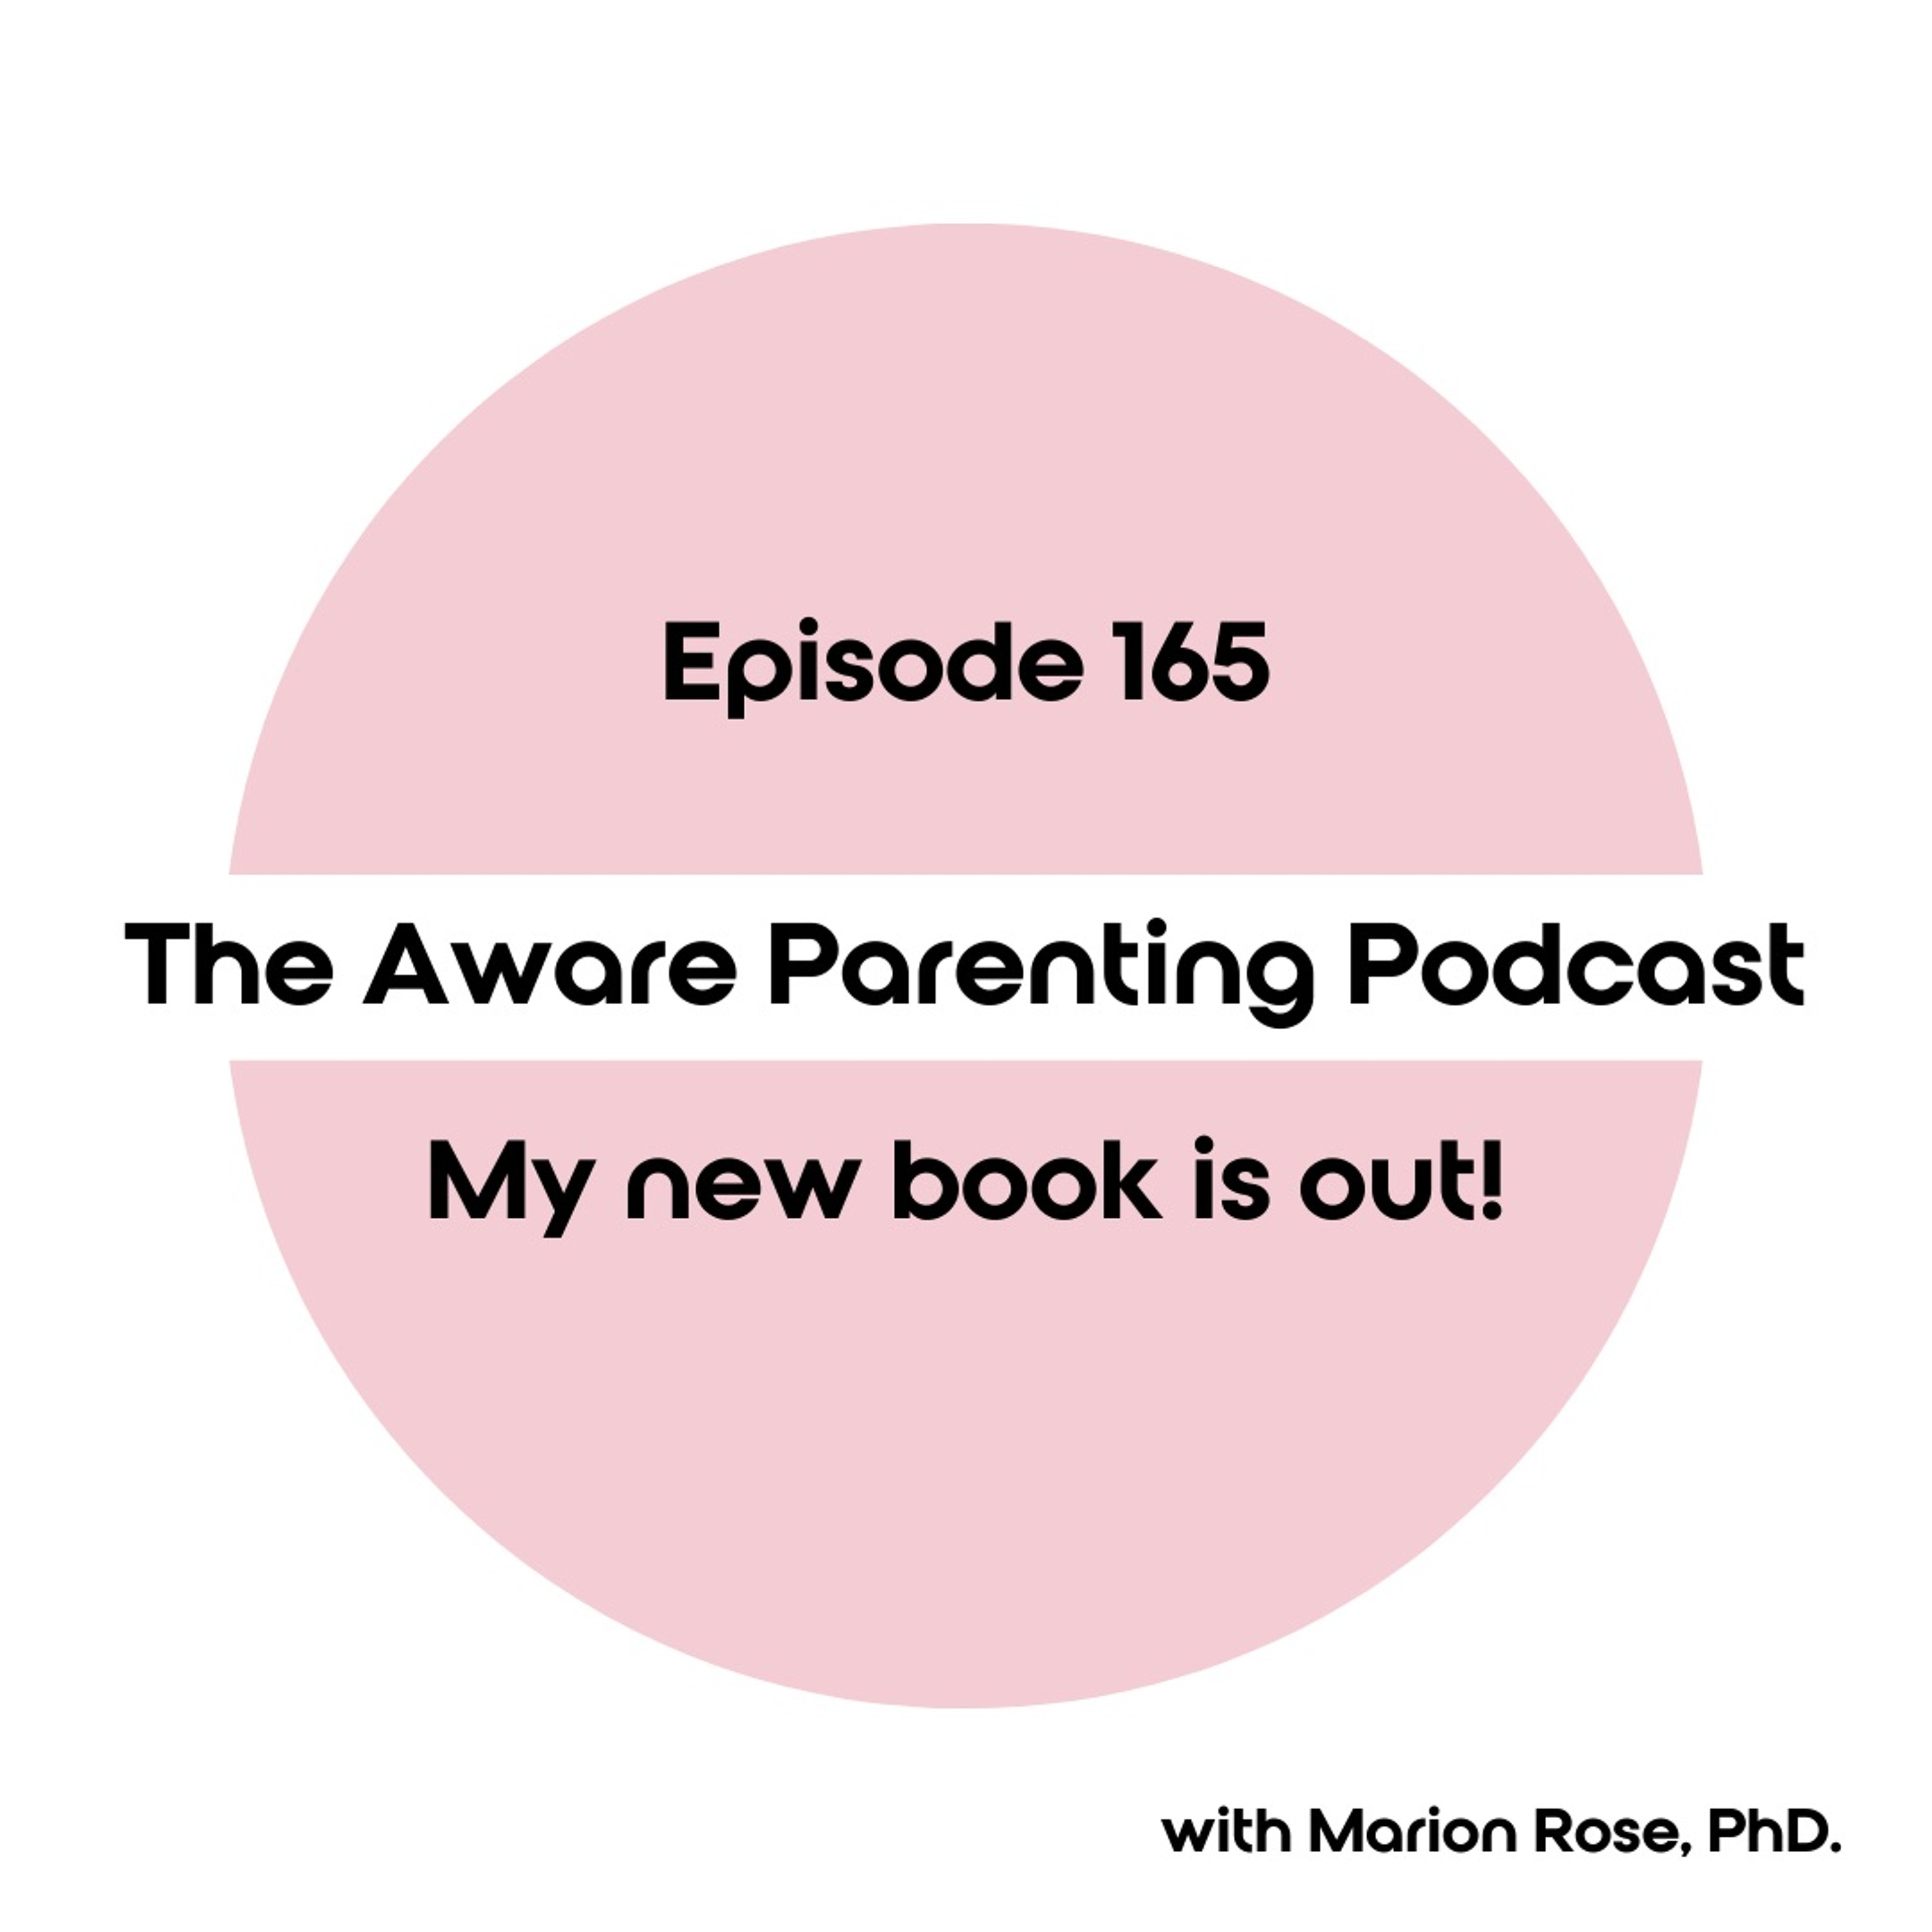 Episode 165: My new book is out!